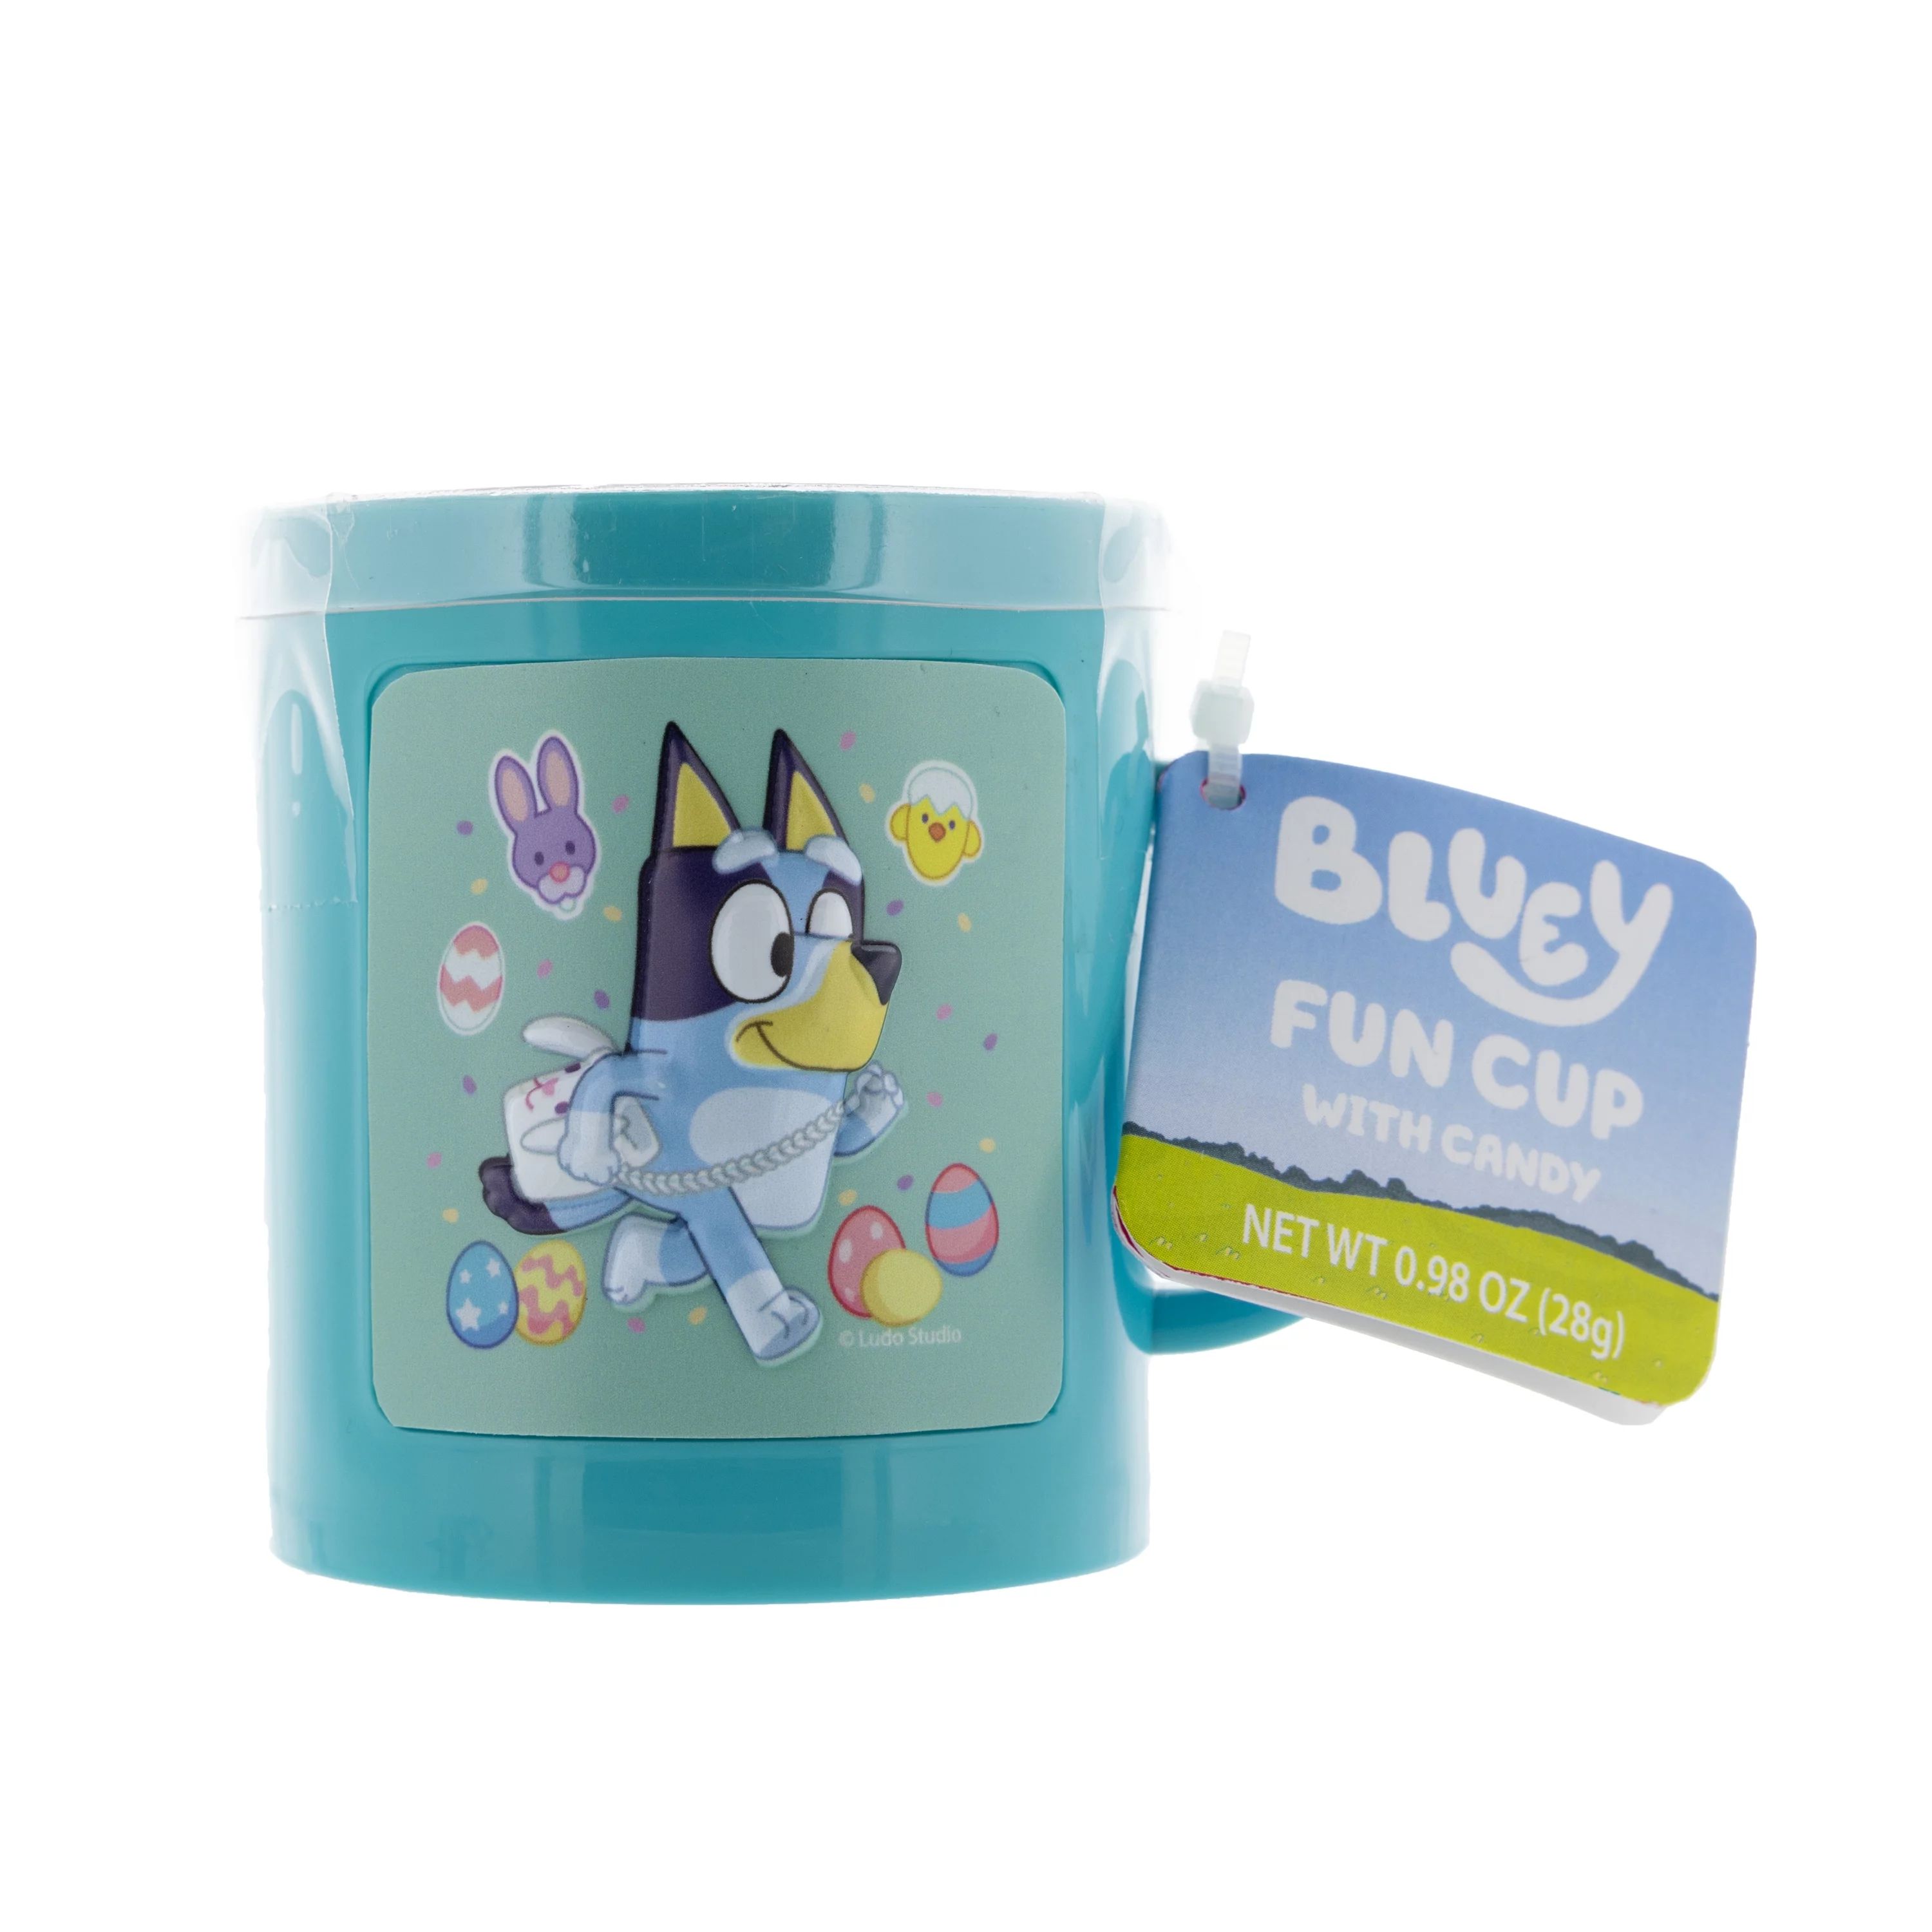 Galerie Small Bluey Fun Cup with Candy, 0.98 oz | Walmart (US)